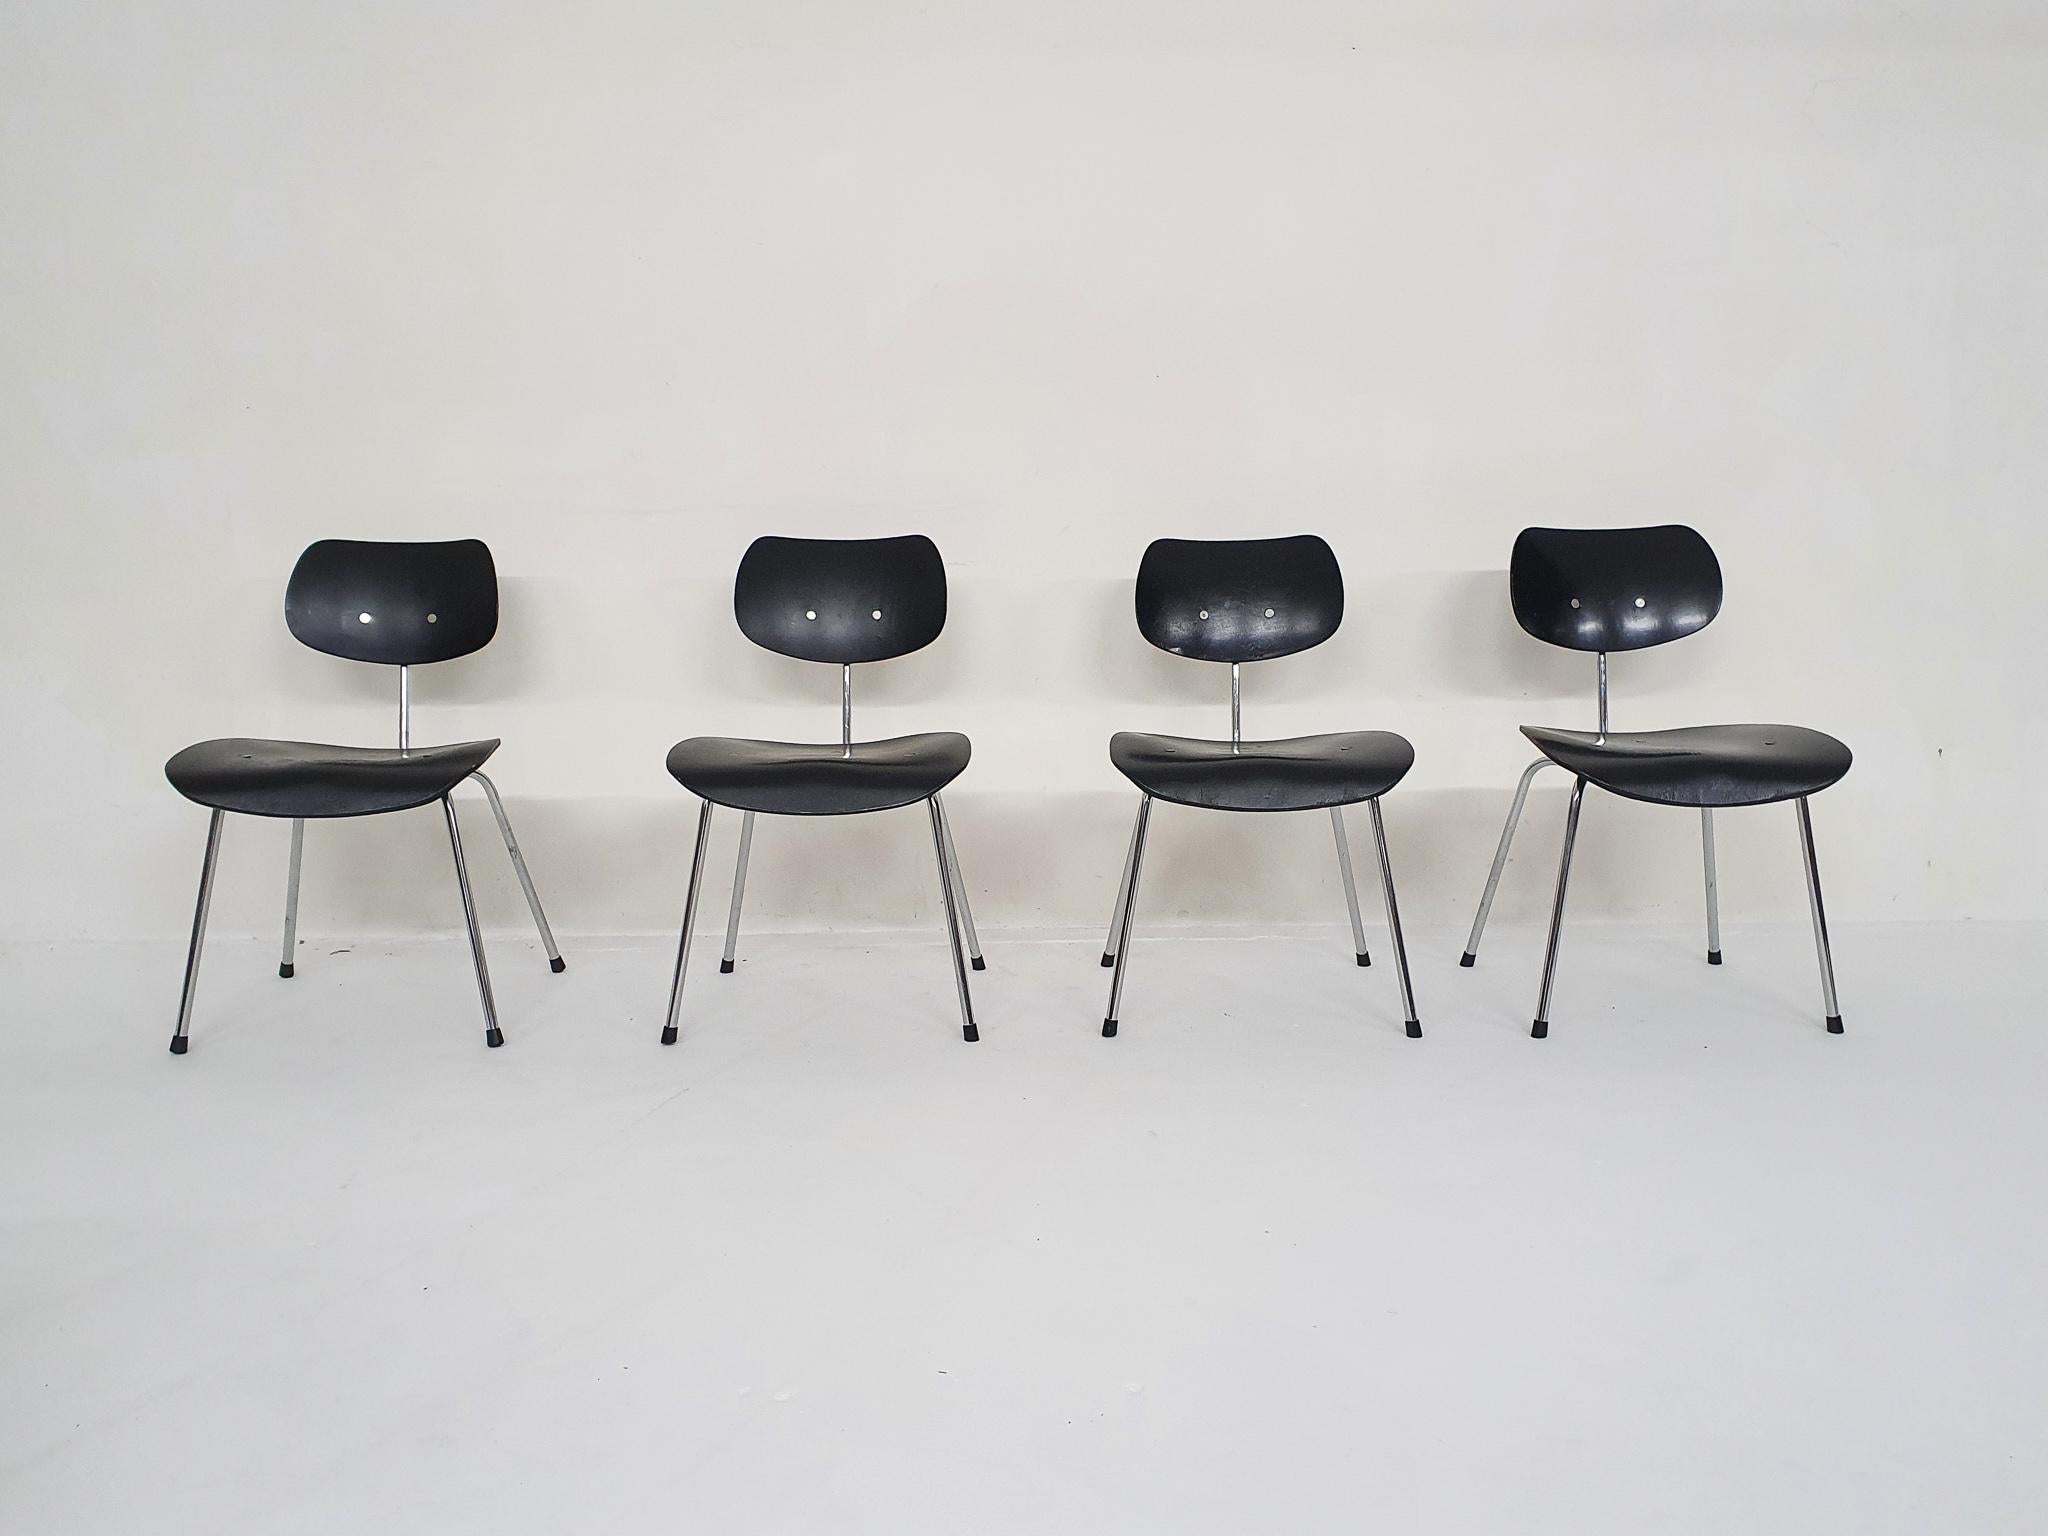 Black plywood dining chairs on metal base. Designed by Egon Eiermann for Wilde+Spieth in Germany.
These are the non stackable chairs, model SE68.
We have replaced all the rubbers under the seats with new originals rubbers from